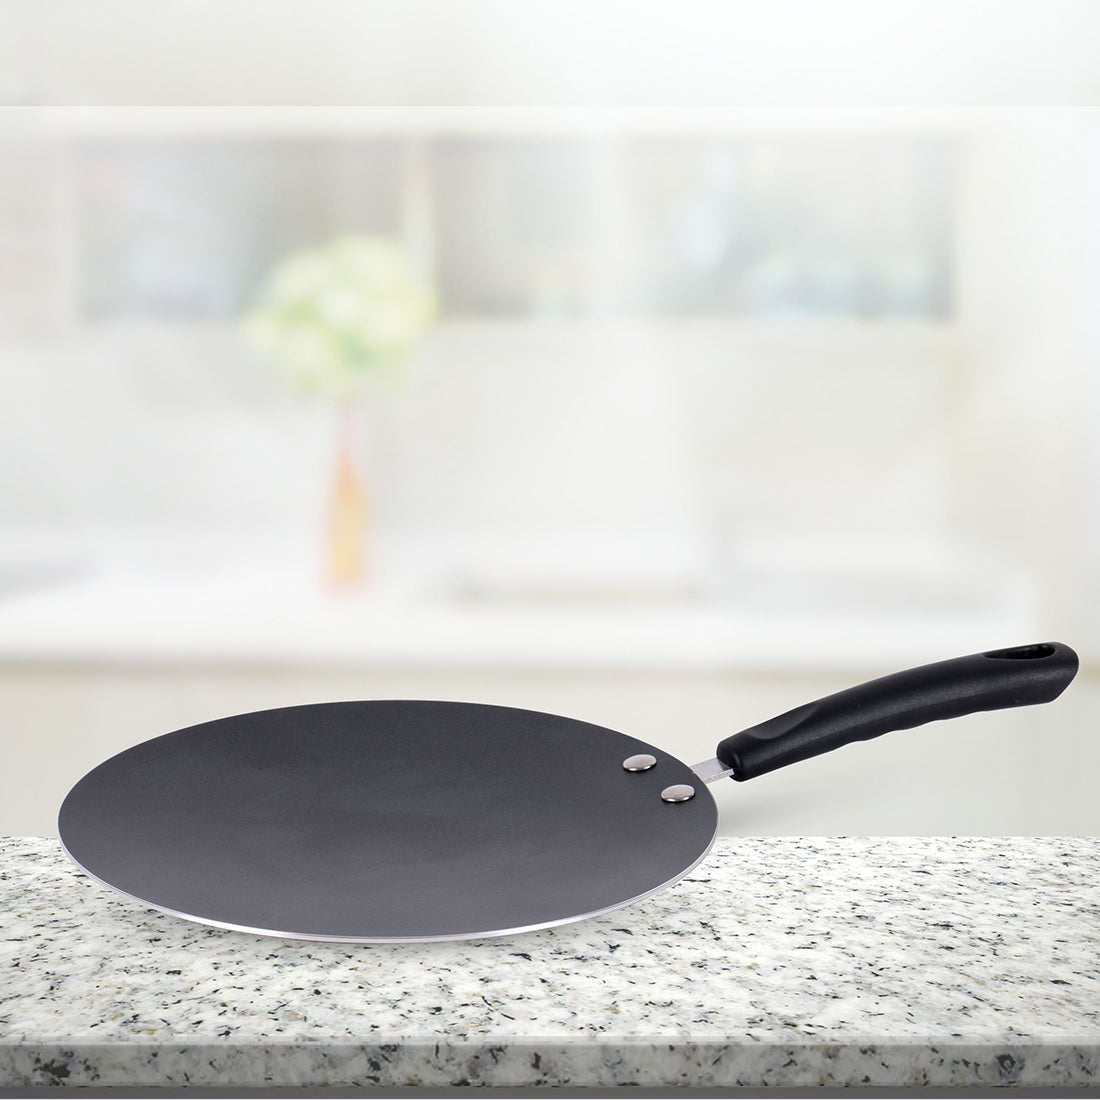 T-fal Professional 12 Inch Nonstick Pan Induction Test & Demo 